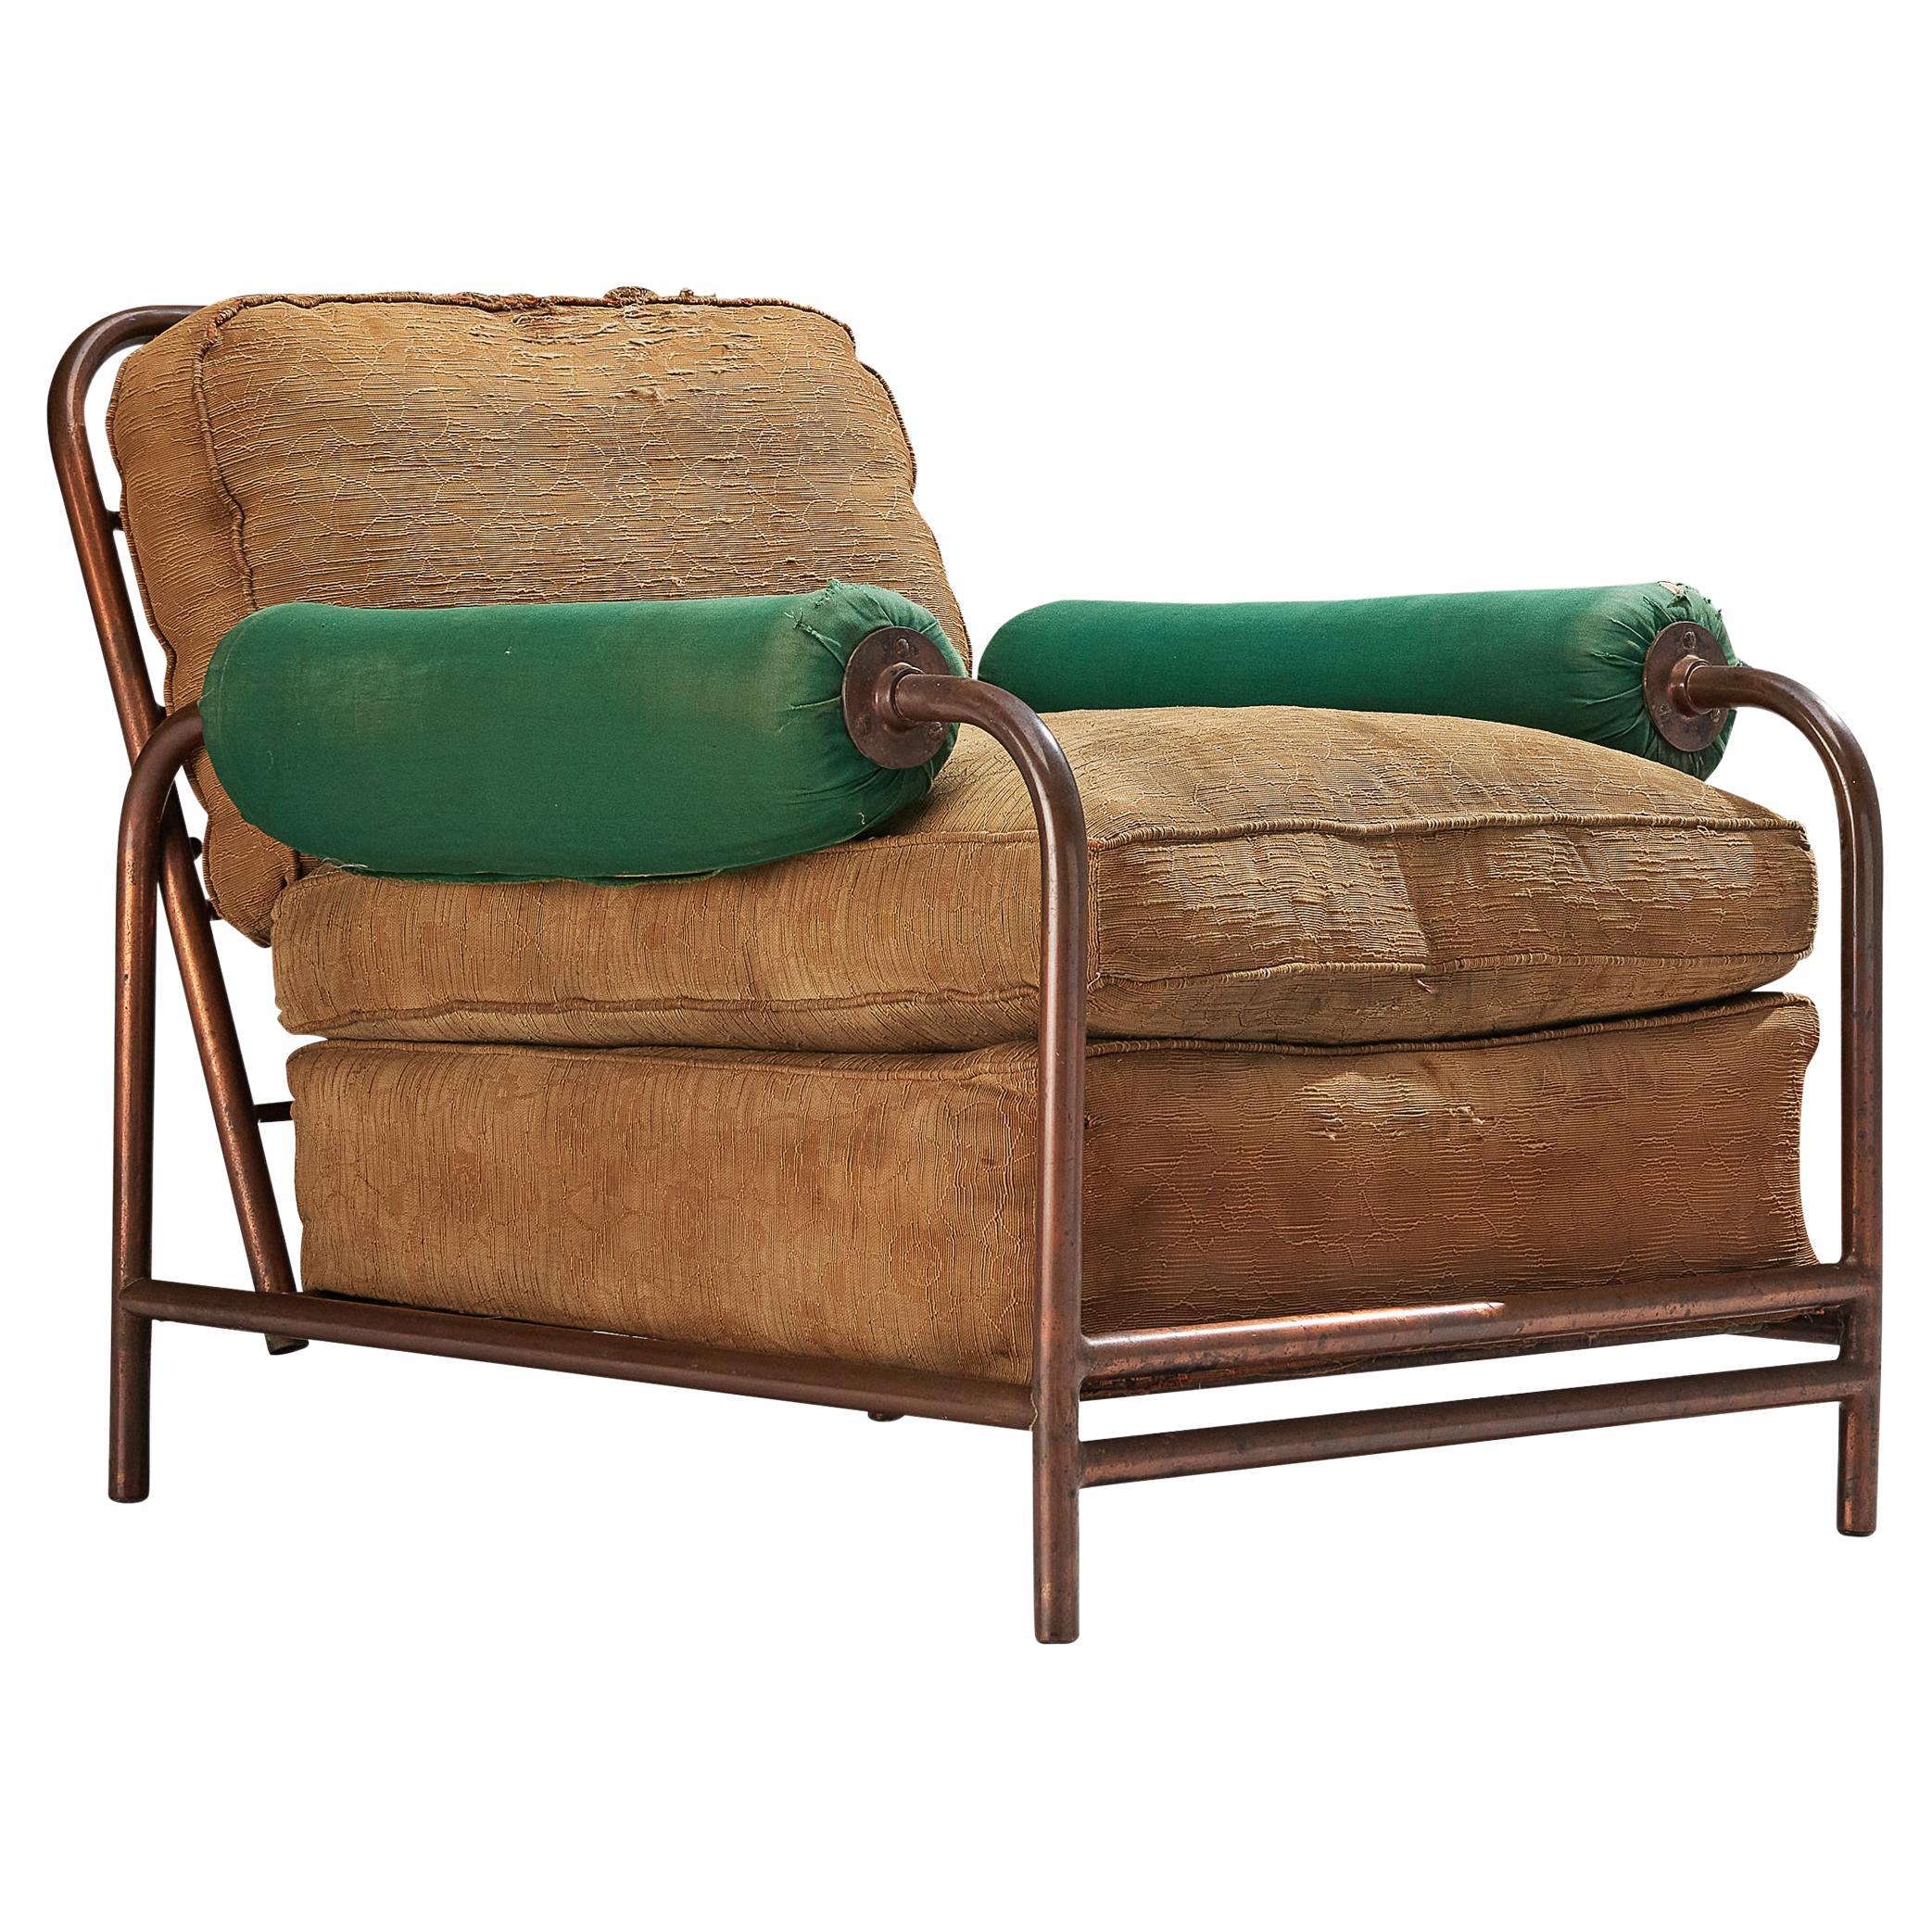 Rare Donald Deskey Tubular Lounge Chair in Copper with Green and Beige Upholster